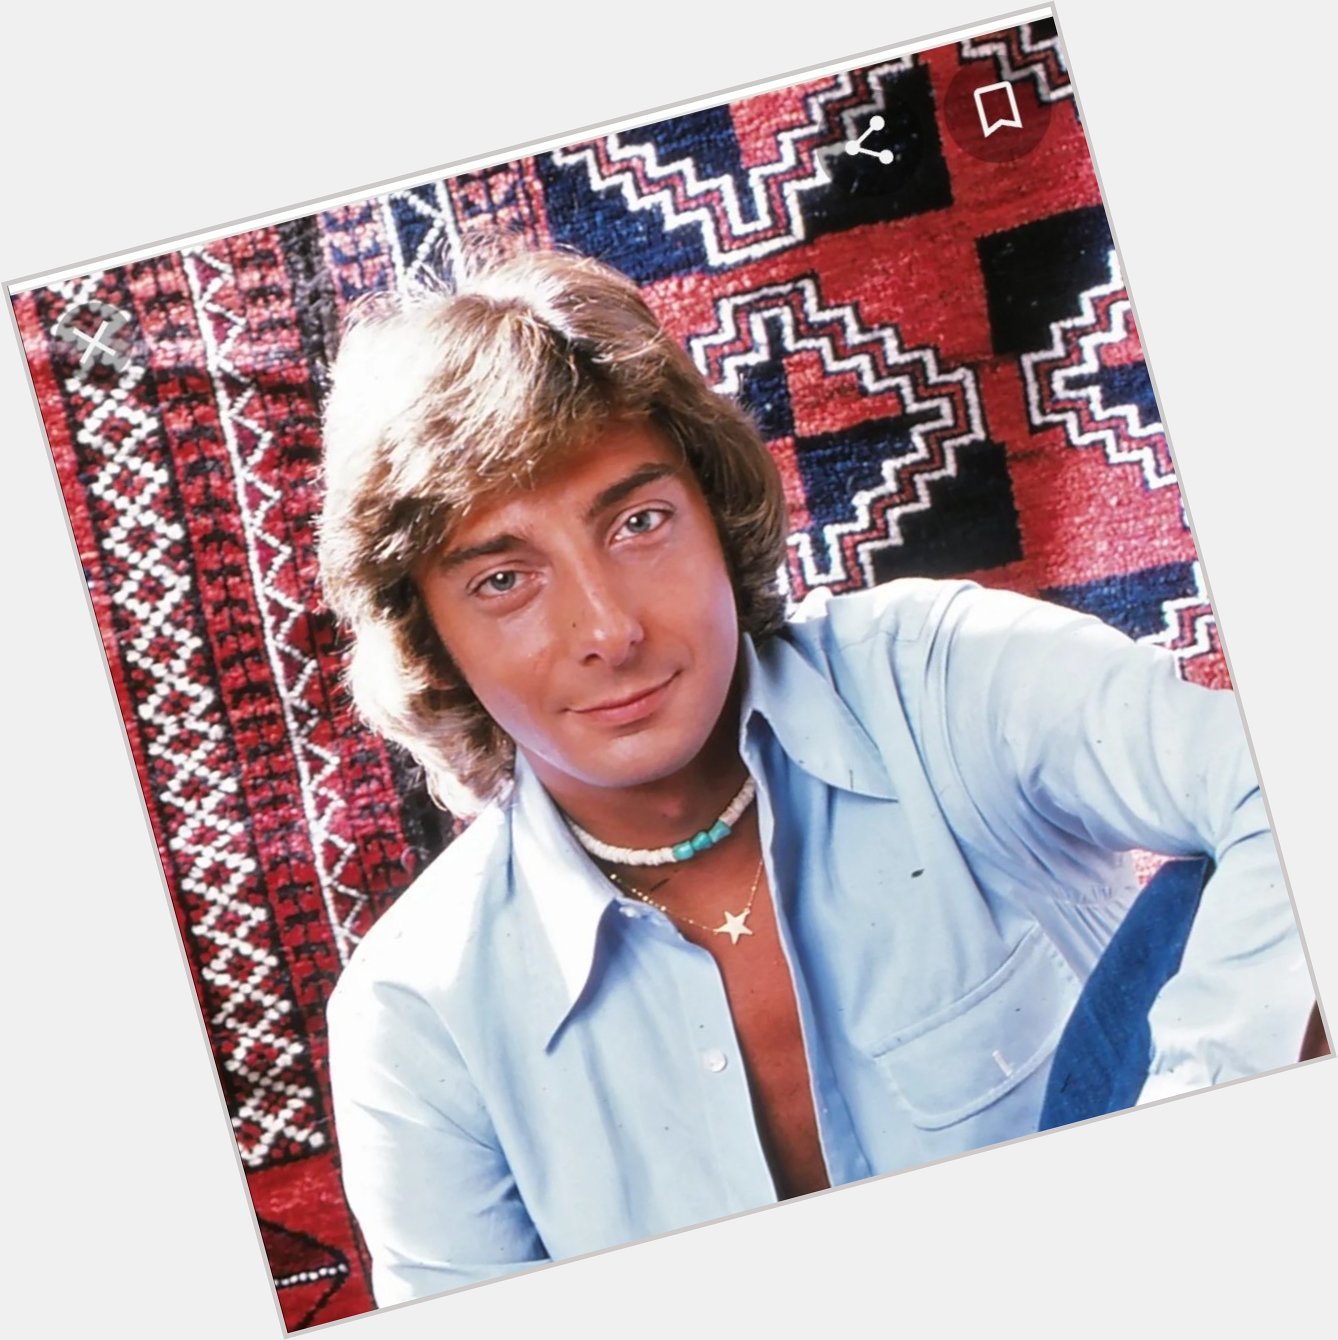 Happy 79th birthday to this guy,Barry Manilow, his music has got me through so many situations over the years. 